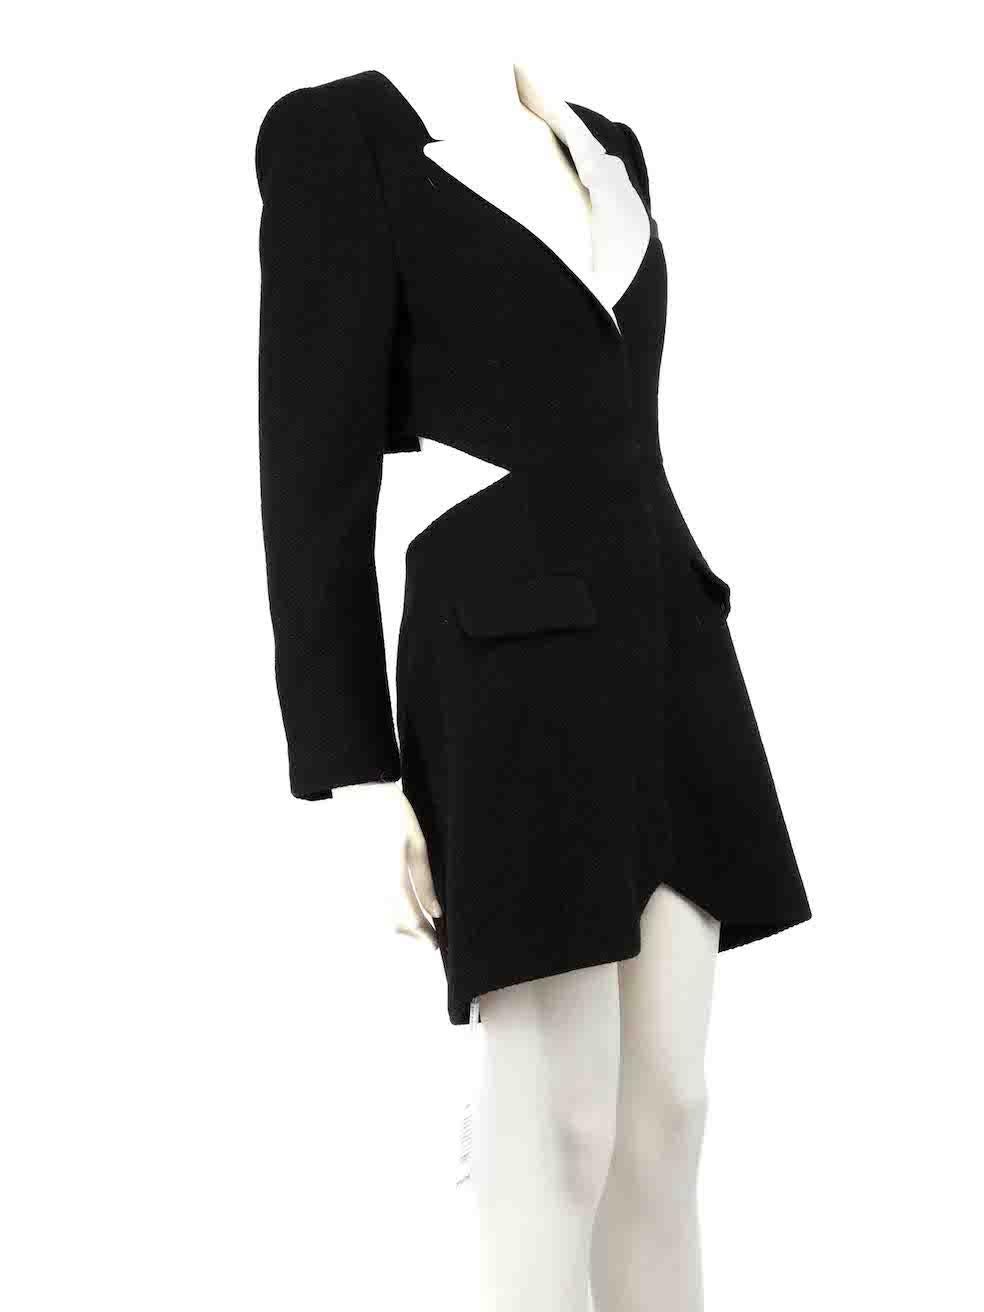 CONDITION is Never worn, with tags. However, tiny marks are seen to the collar due to poor storage on this new Self-Portrait designer resale item.
 
 
 
 Details
 
 
 Model: Tuxedo mini dress
 
 Black
 
 Wool
 
 Dress
 
 Cutout details
 
 Mini
 
